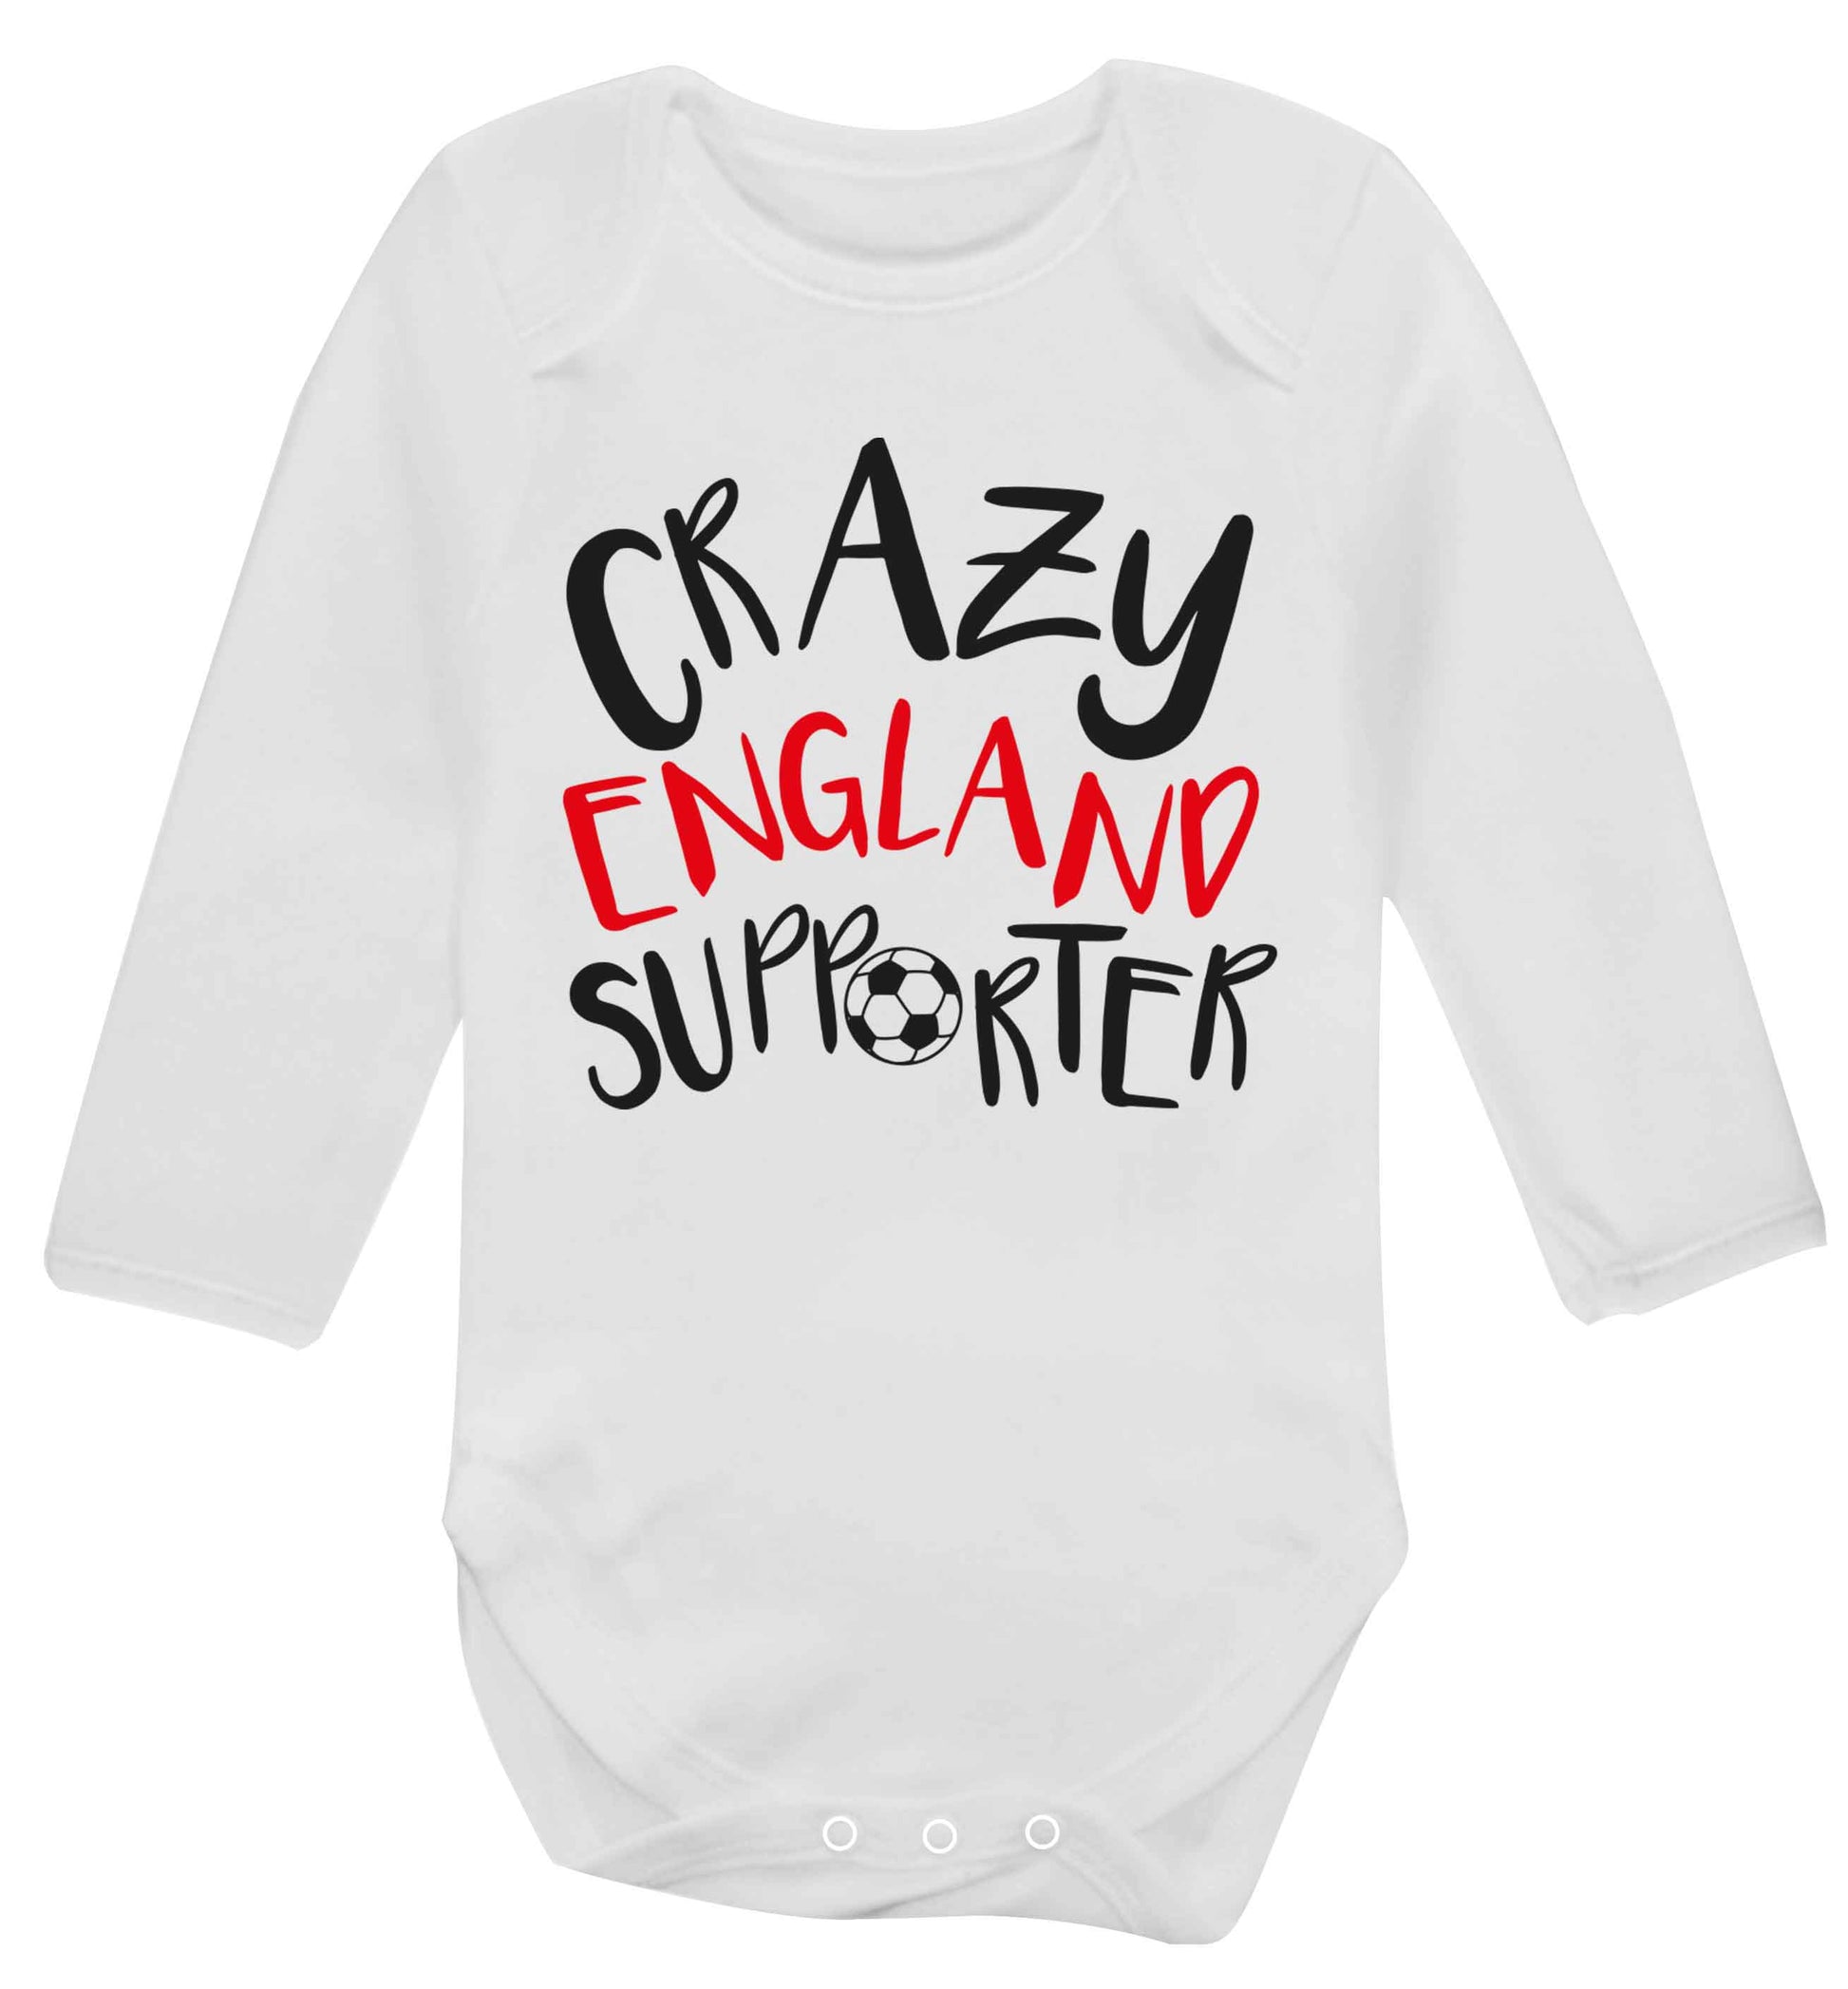 Crazy England supporter Baby Vest long sleeved white 6-12 months